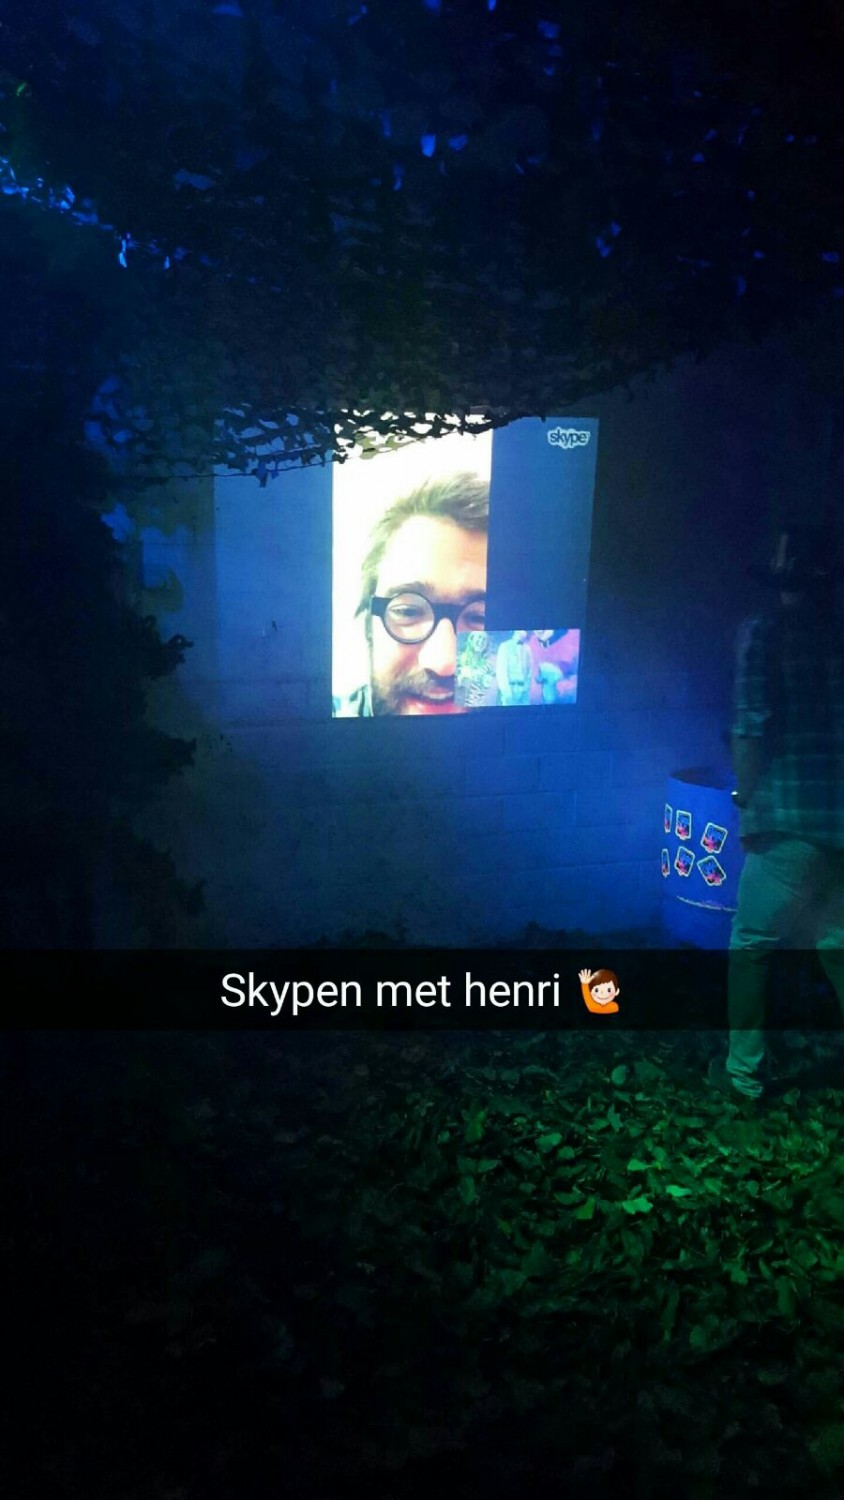 Skype from their side